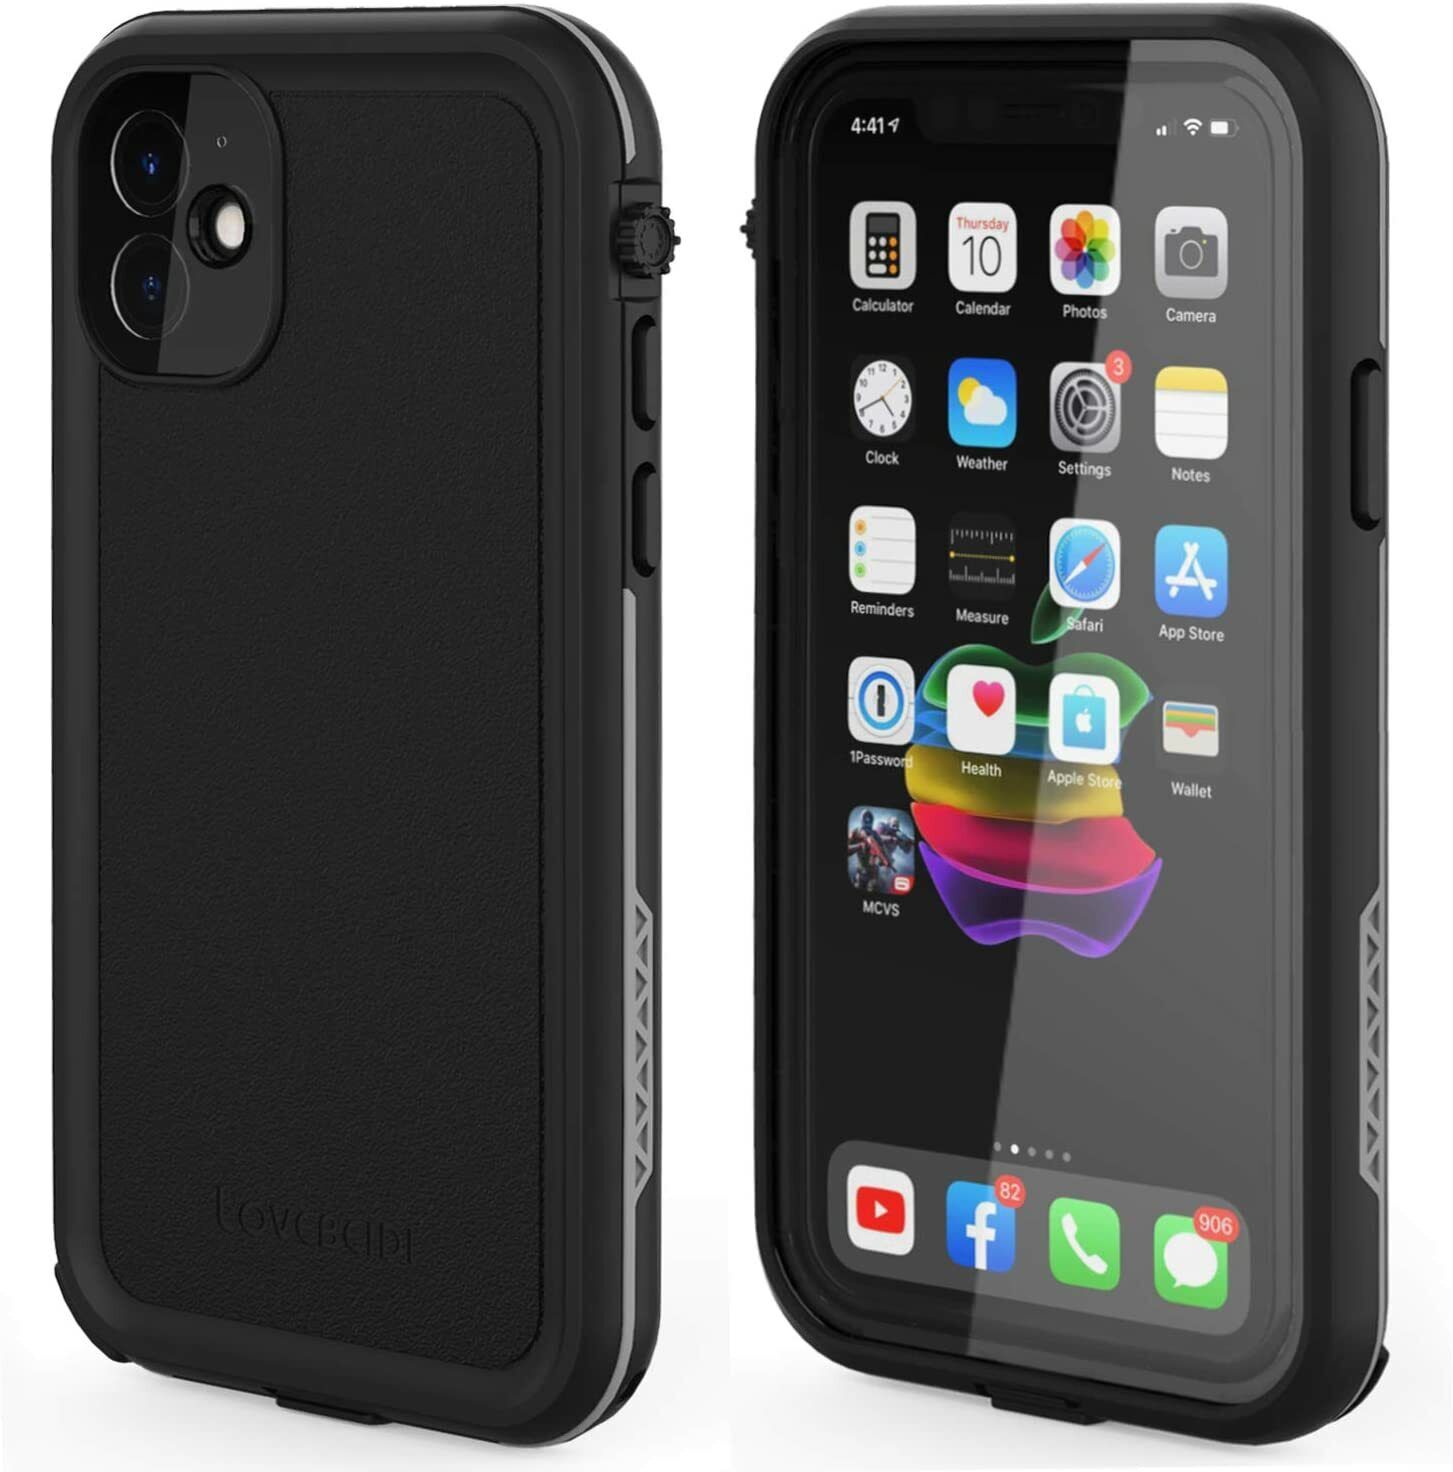 Waterproof Case For iPhone 11 Heavy Duty Shockproof Cover with Screen Protector